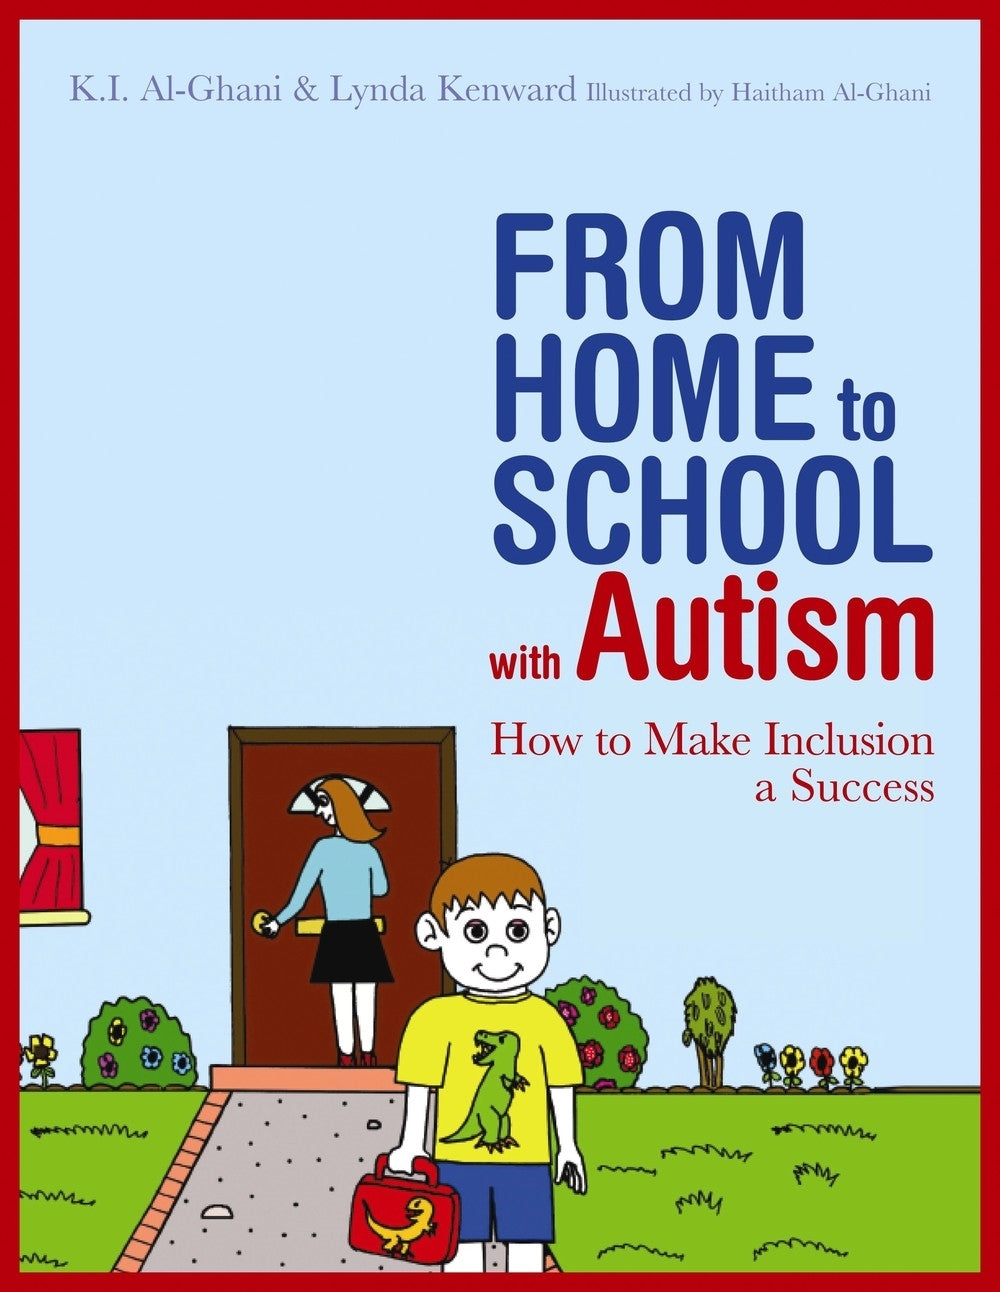 From Home to School with Autism by Kay Al-Ghani, Lynda Kenward